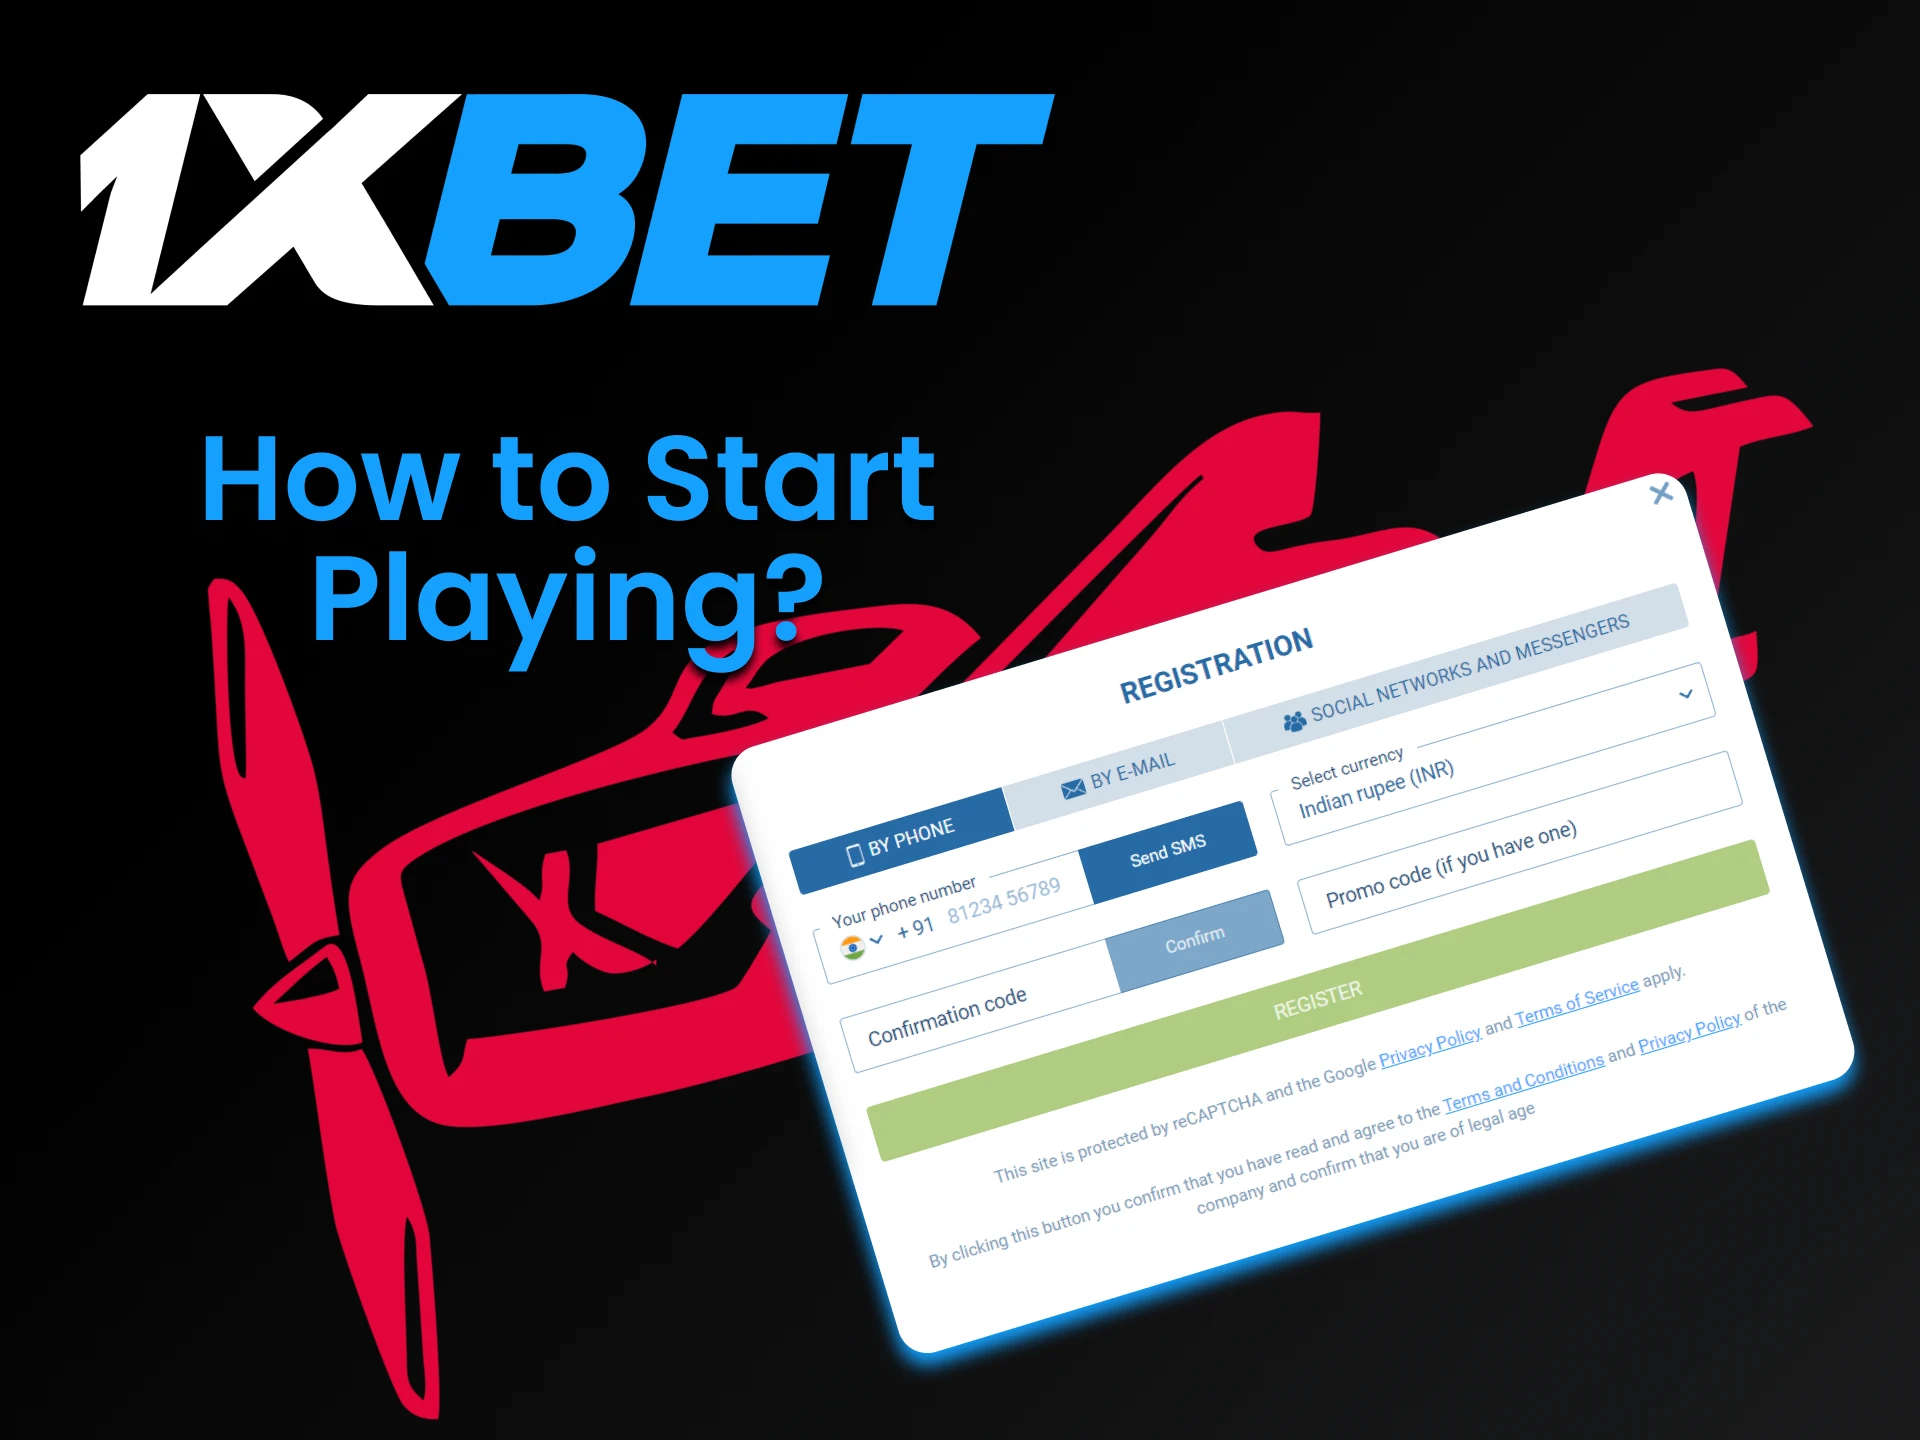 It is easy and simple to start playing the Aviator game at 1xbet.